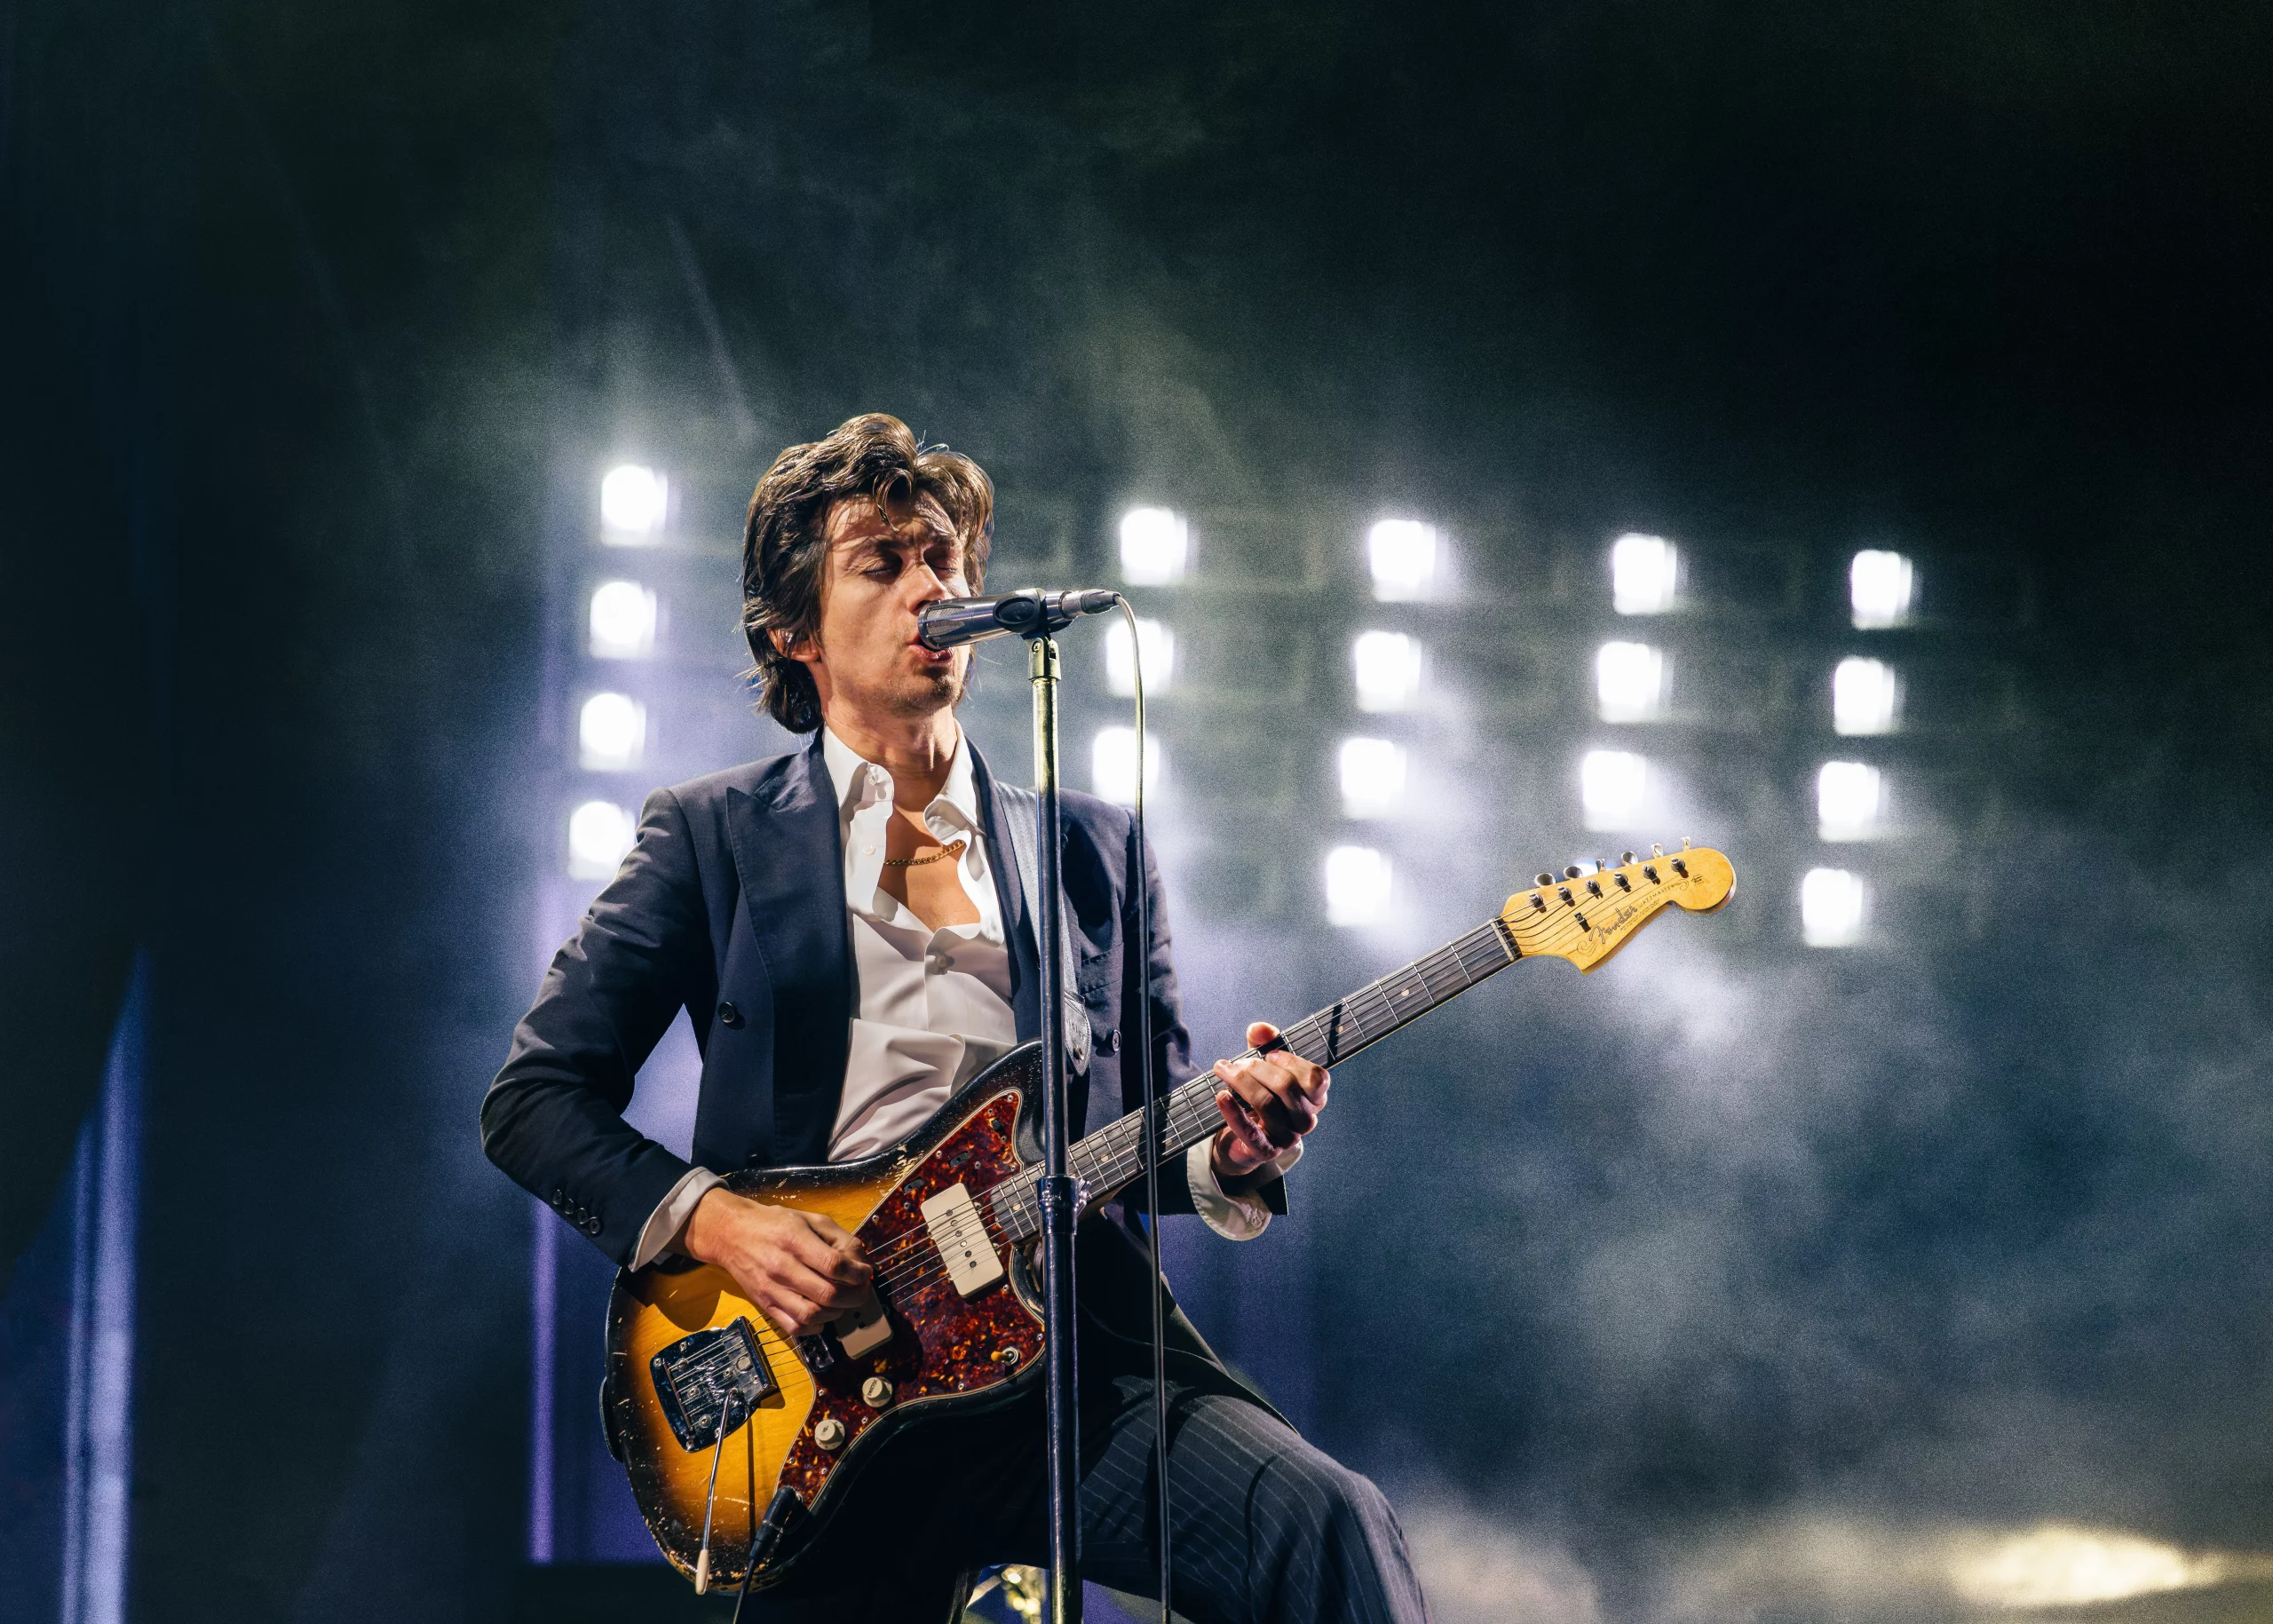 The lead singer of the Arctic Monkeys, Alex Turner singing and playing guitar.